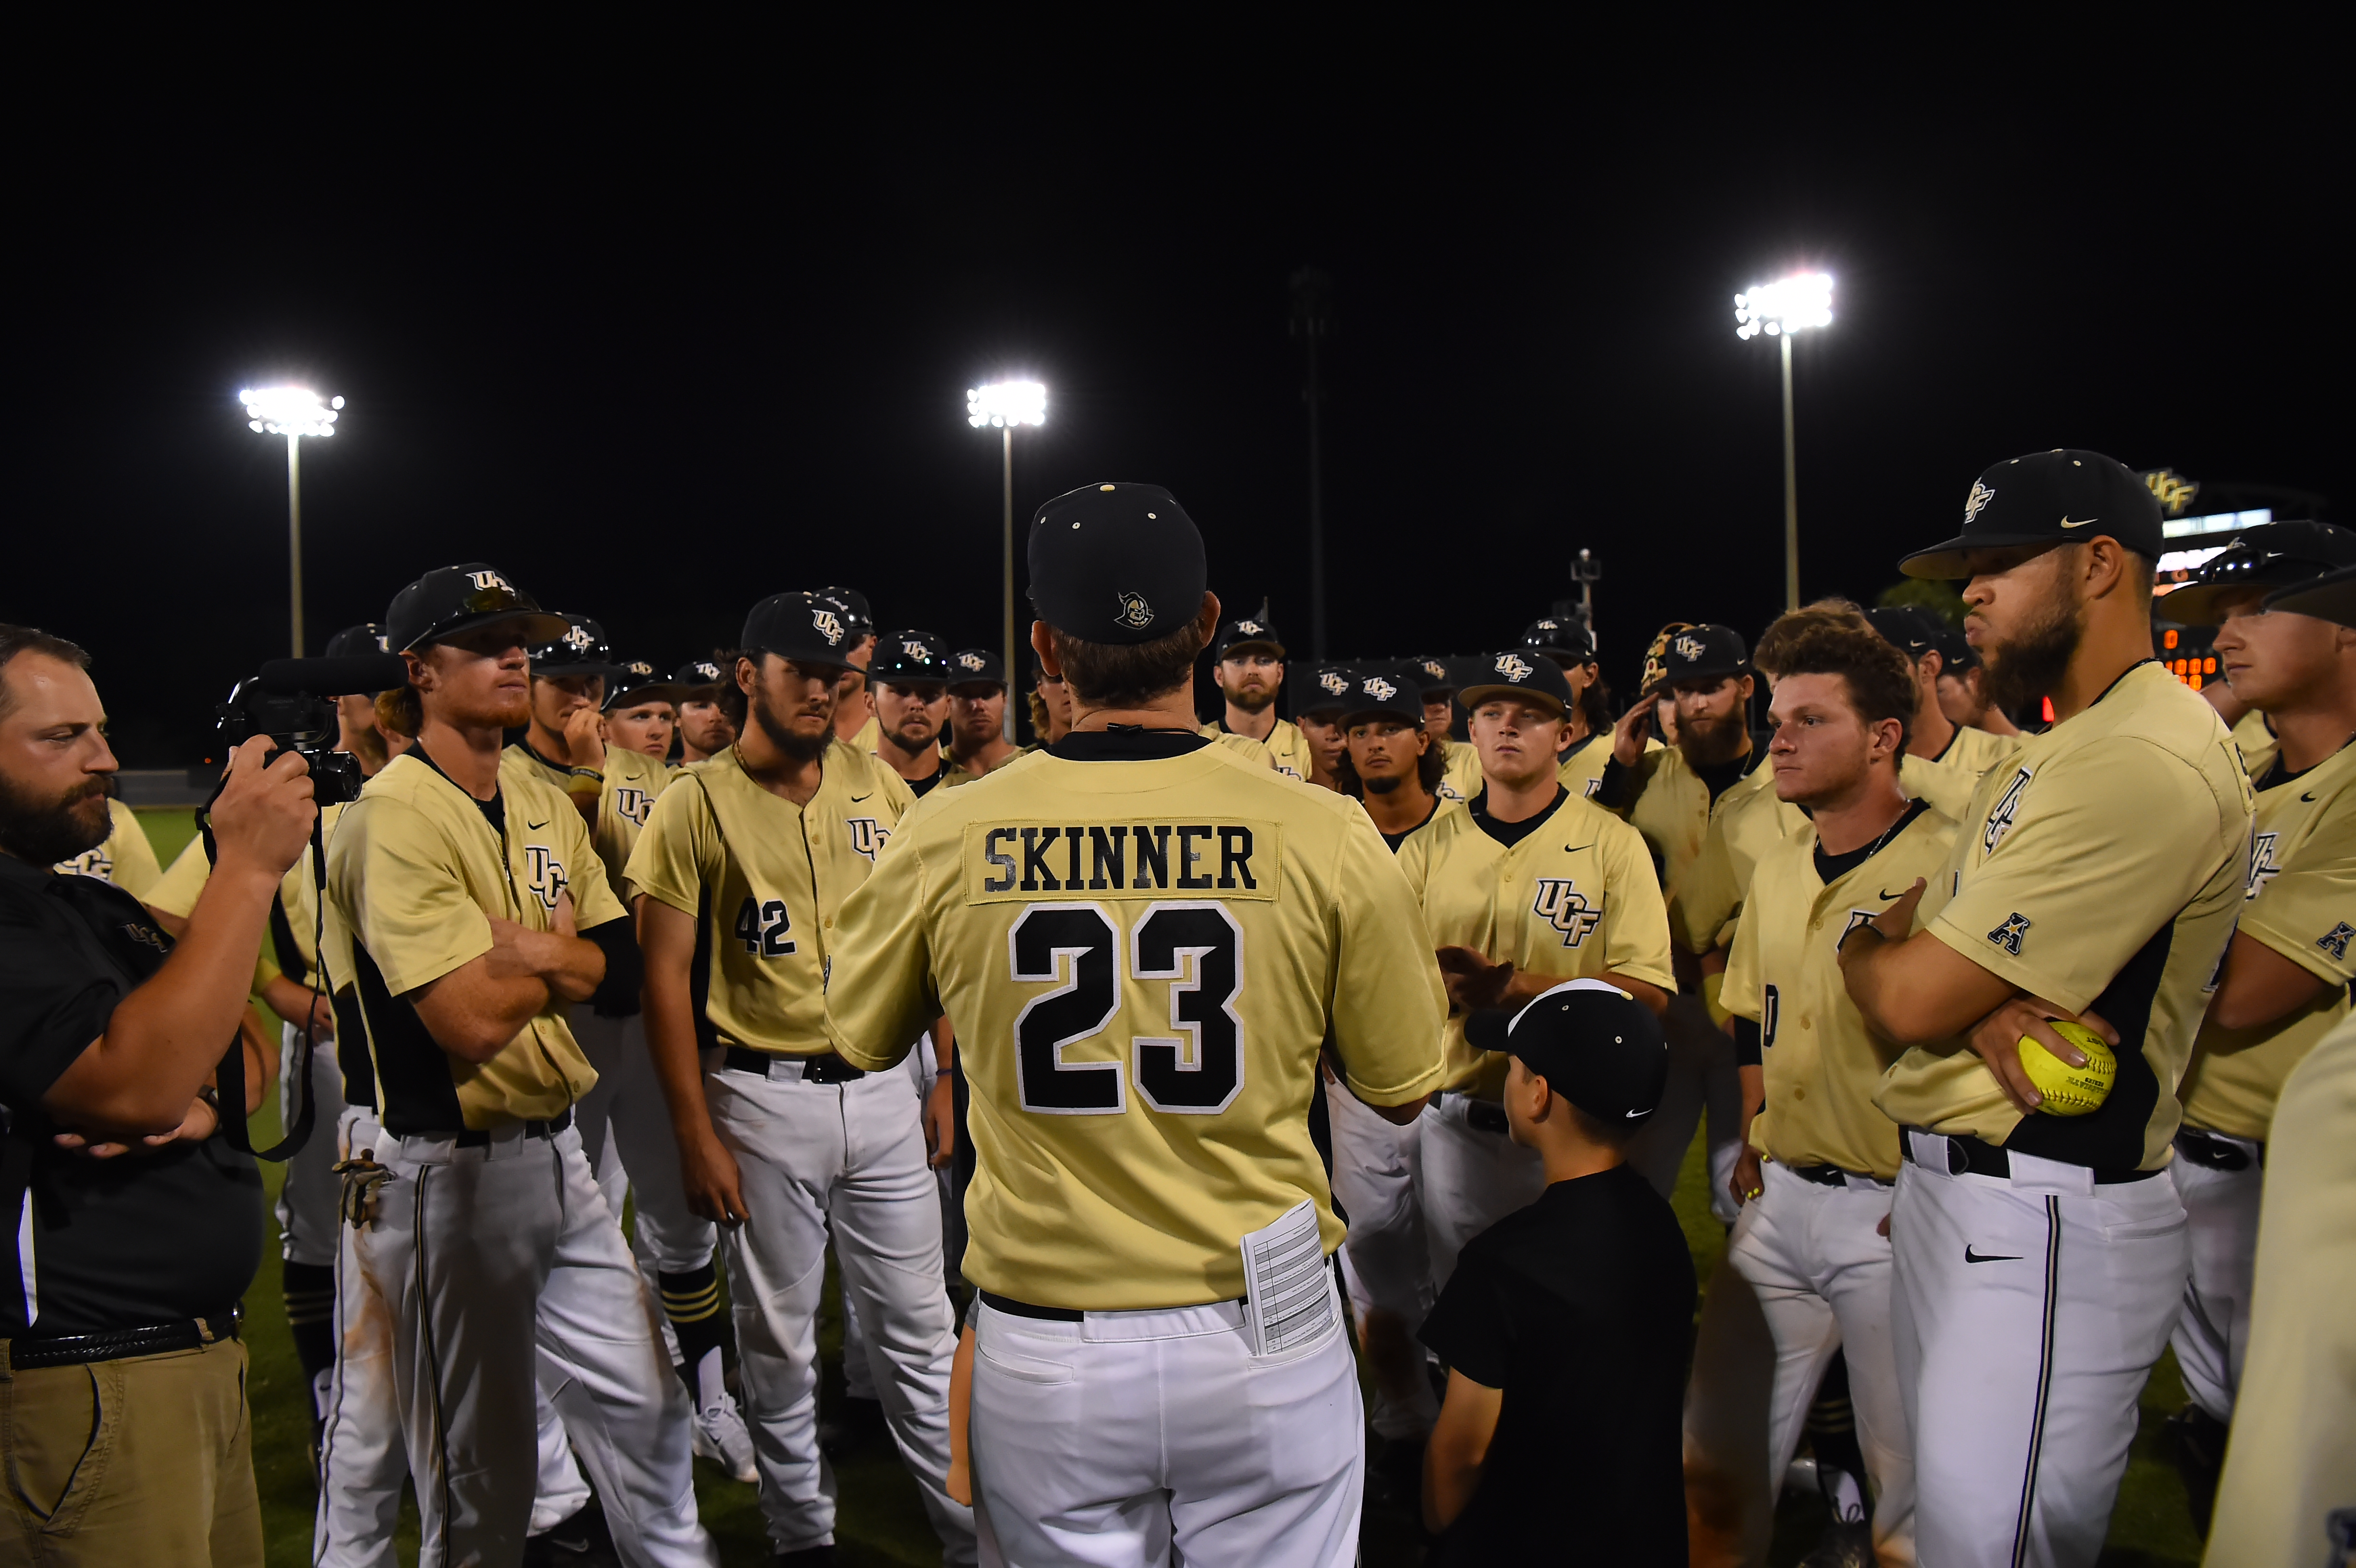 The UCF Baseball team wore Joe Skinner's name on its jerseys throughout its weekend series vs. Memphis.